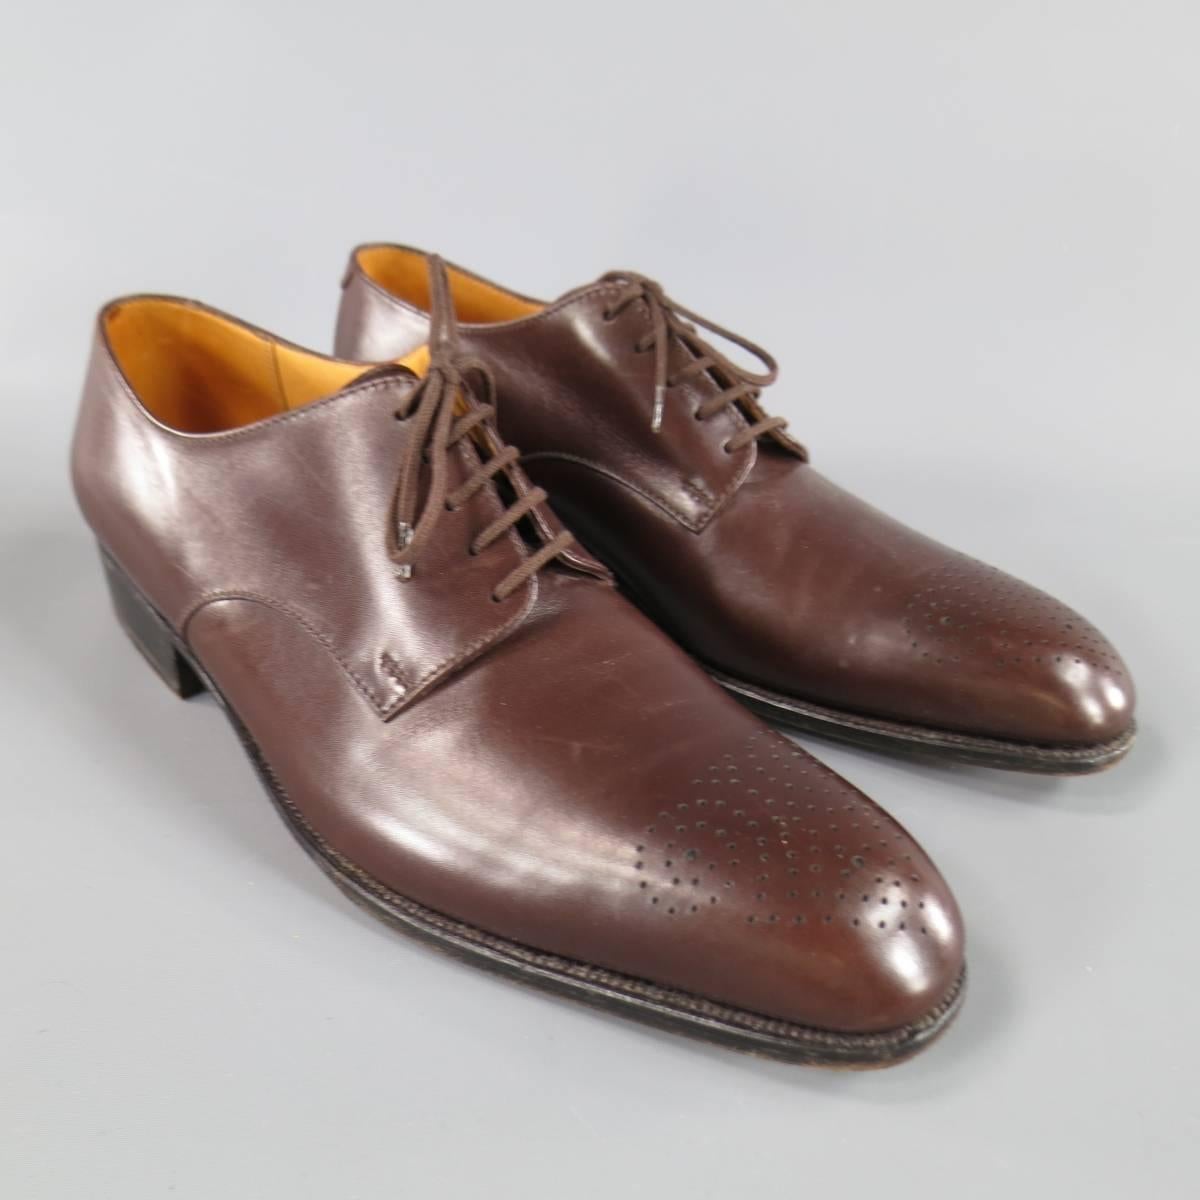 J.M. WESTON Lace-Up Shoes consists of leather material in a burgundy color tone. Designed in a round, perforated wingtip front and same tone laces. Detailed with black leather sole with heel. Comes with original box. Made in Italy.
 
Excellent